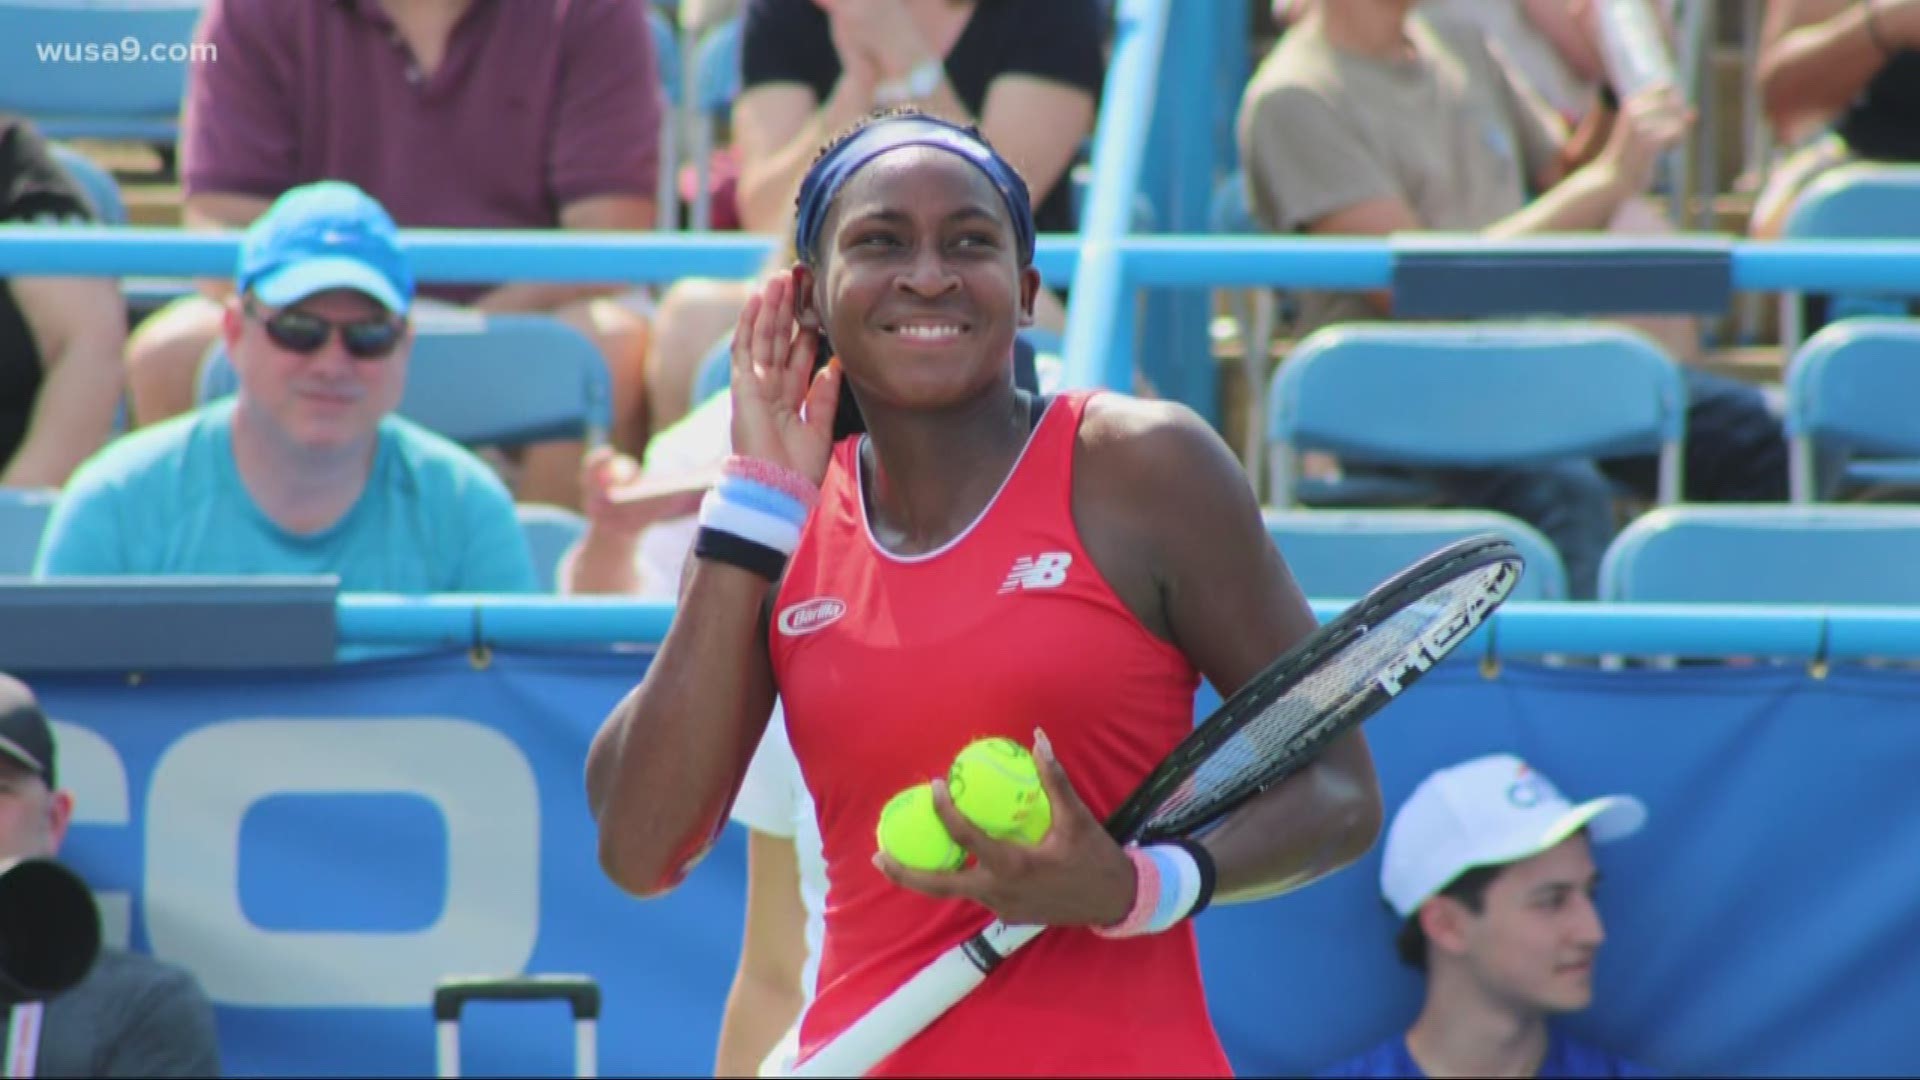 Coco Gauff advances to the main draw in her first tournament since her run at Wimbledon.